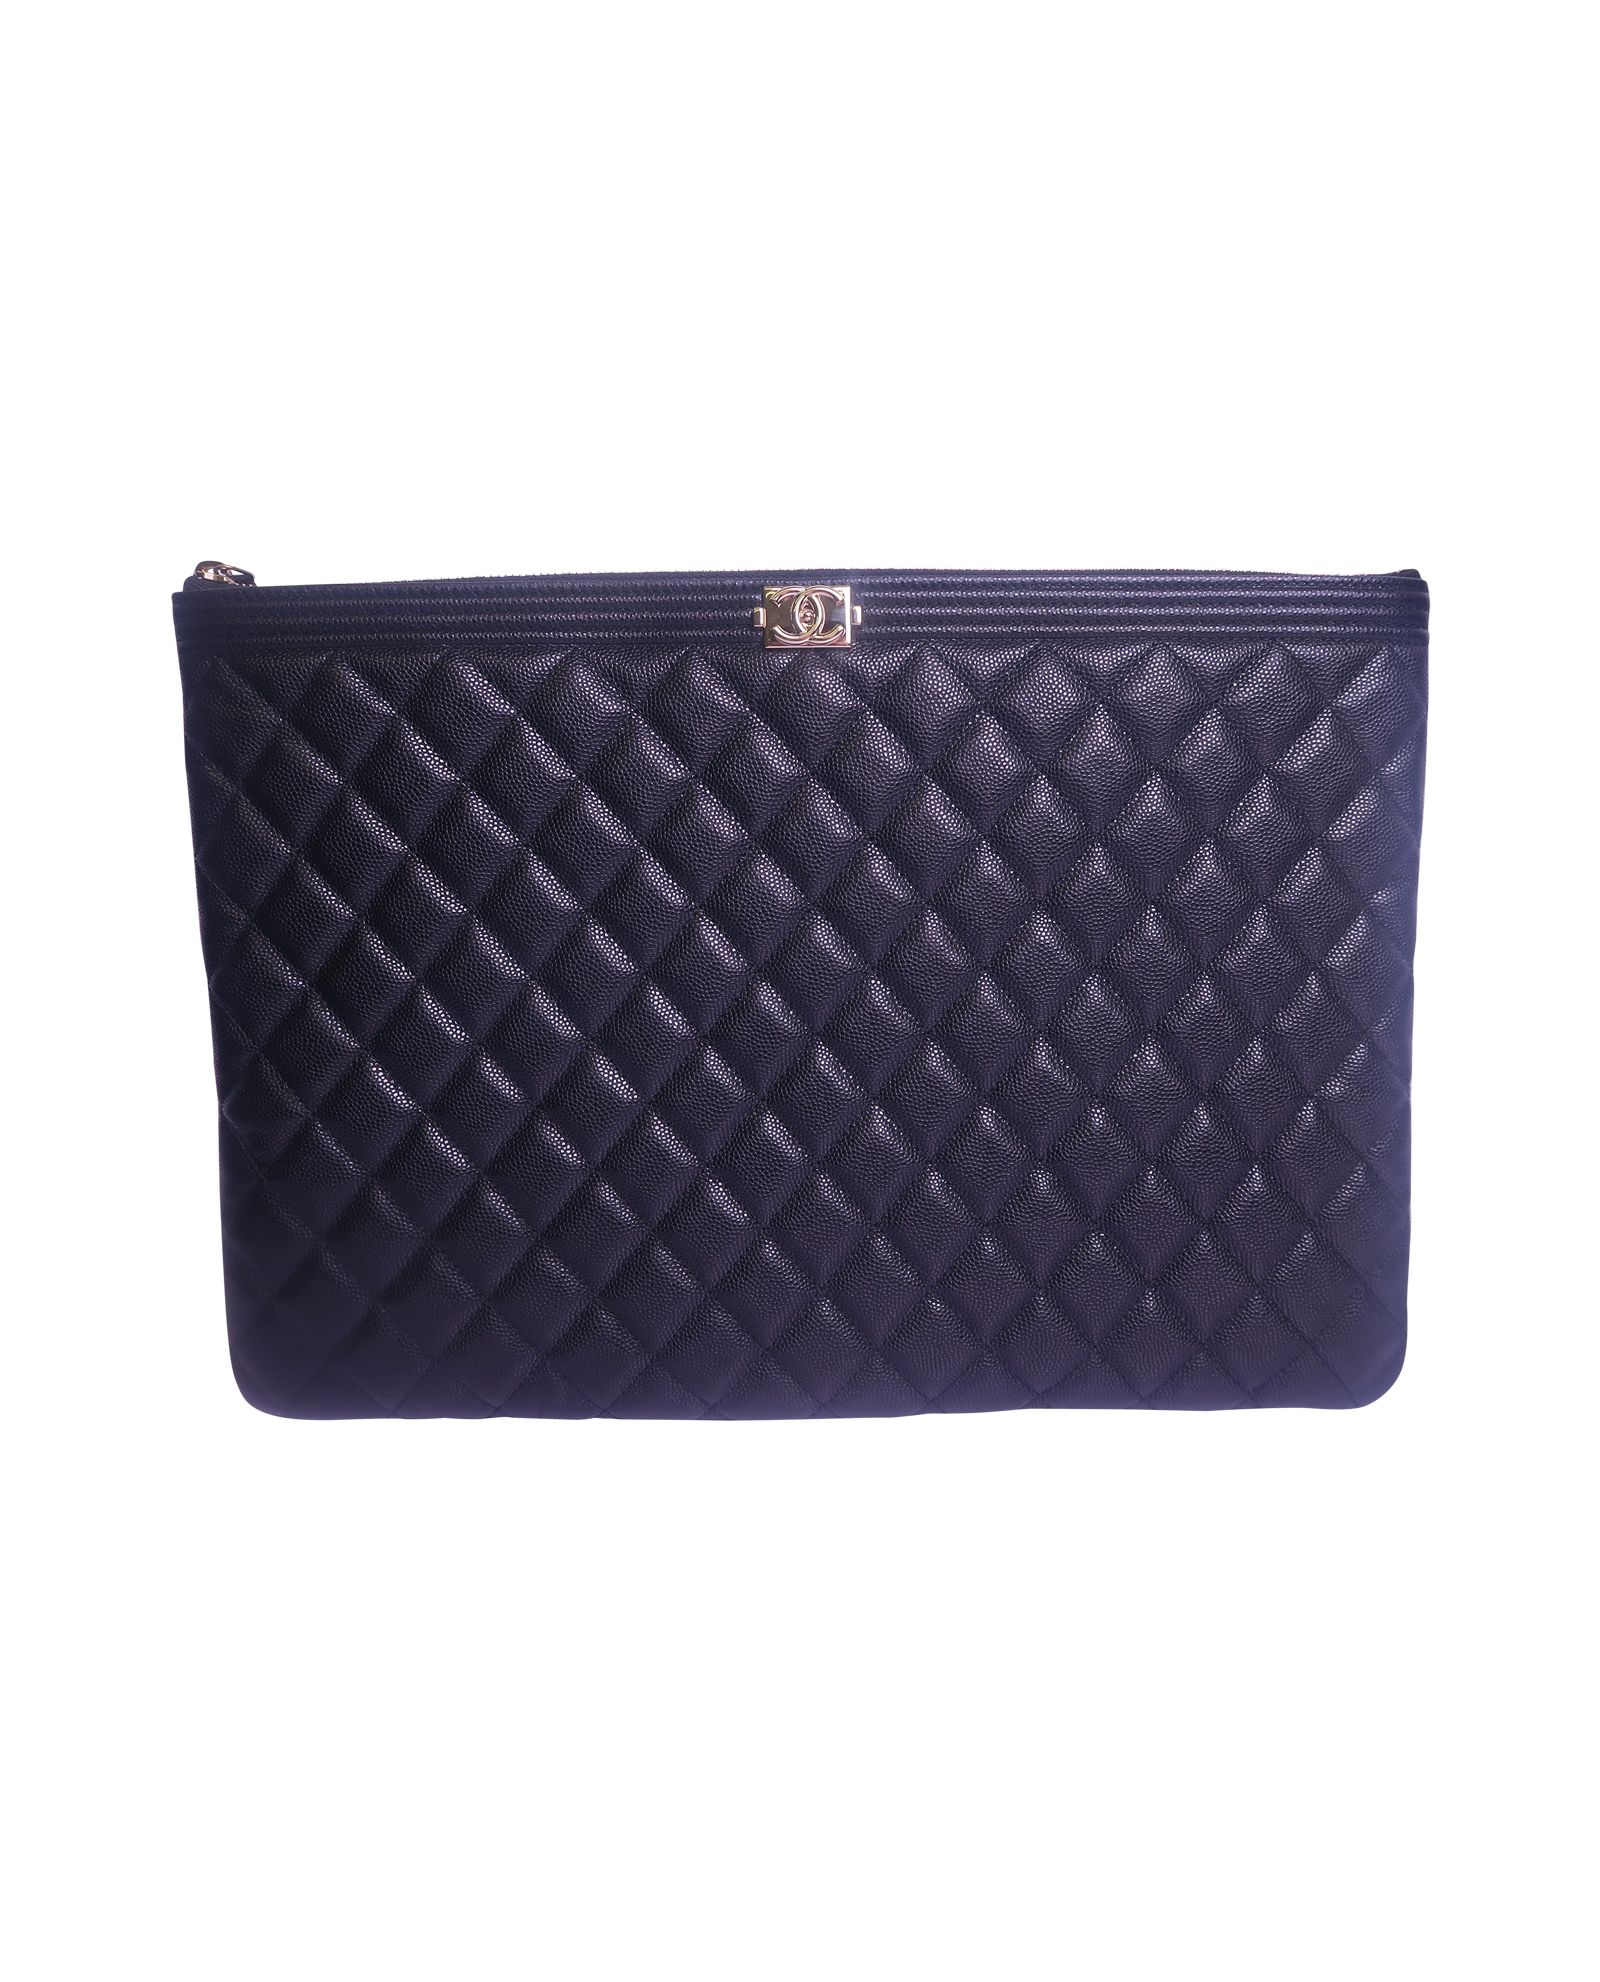 At vise Lagring Marty Fielding Chanel Boy Laptop Sleeve, Small Leather Goods - Designer Exchange | Buy  Sell Exchange